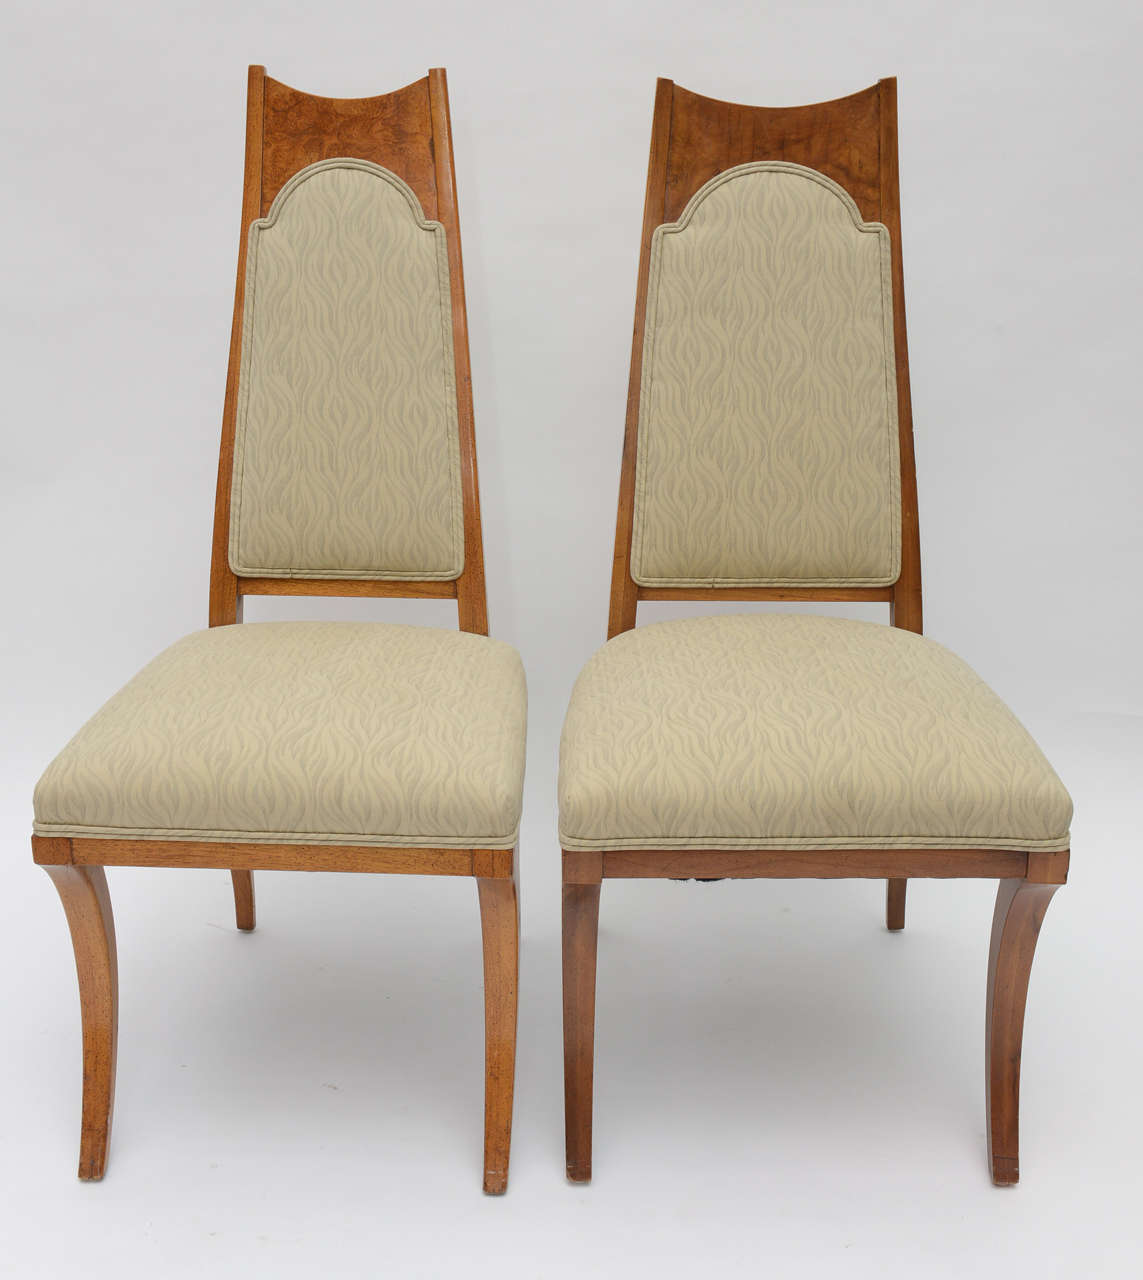 High style and elegant mid century modern chairs with upholstered seats and backs. Set of six.